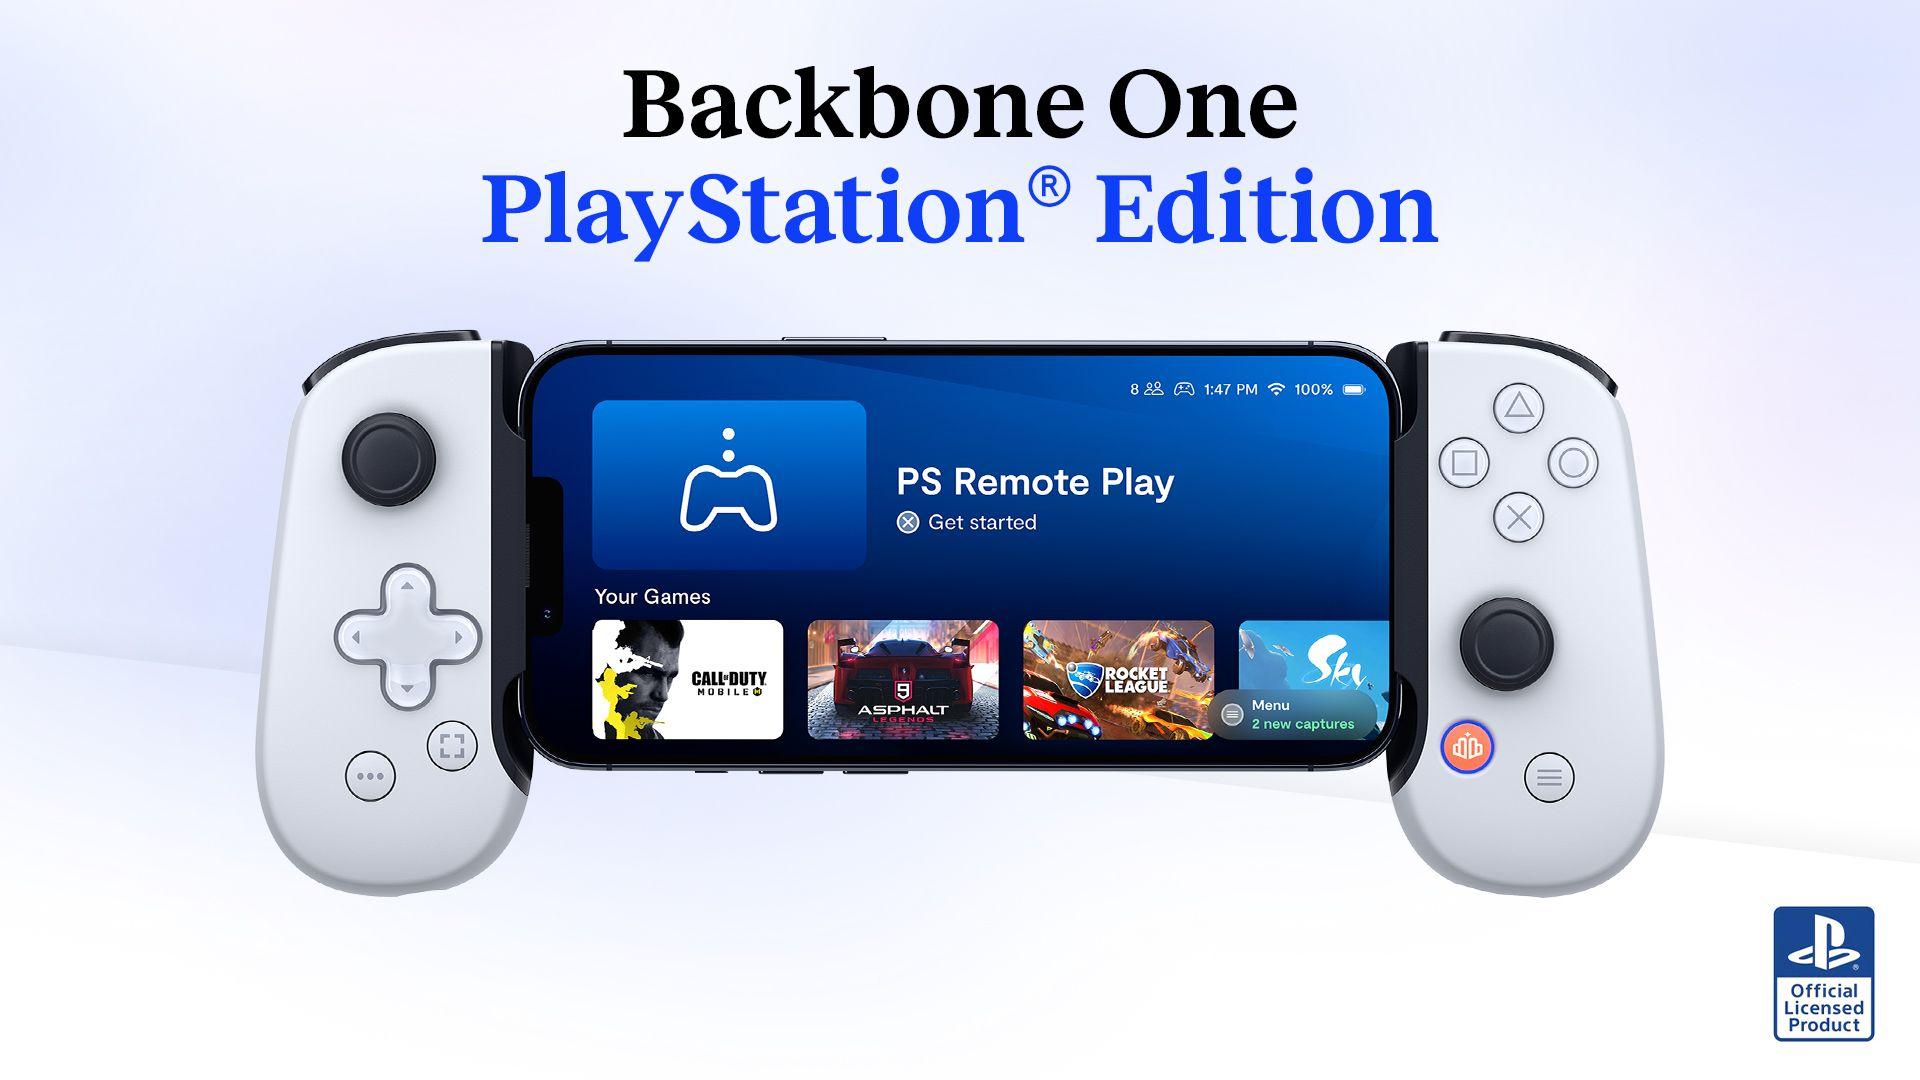 Backbone and PlayStation® partner to release new controller